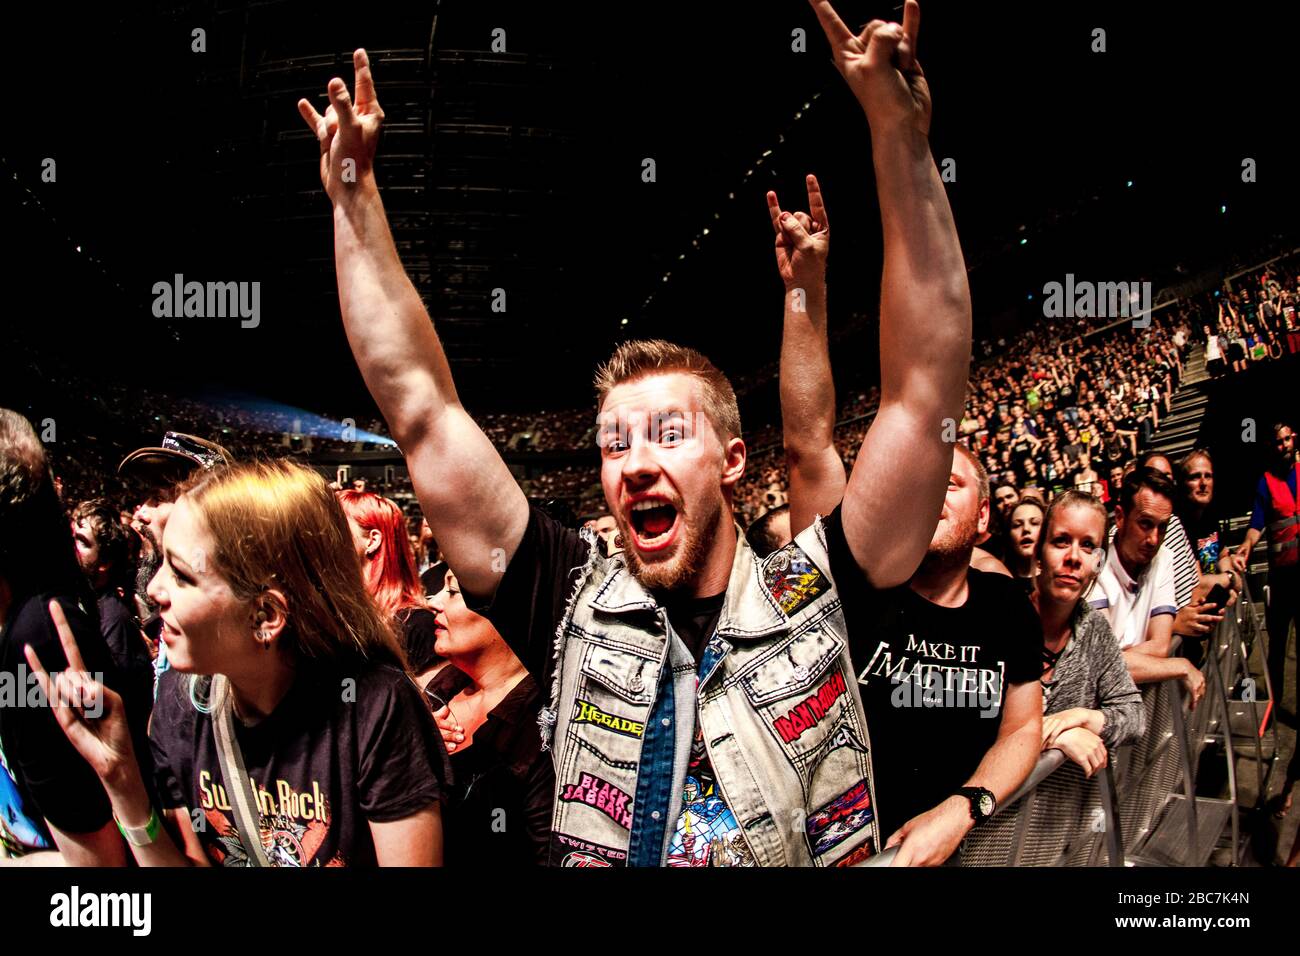 Copenhagen, Denmark. 05th, June 2018. Concerts goers seen at a live concert with the heavy metal band Iron Maiden at Royal Arena in Copenhagen. (Photo credit: Gonzales Photo - Lasse Lagoni). Stock Photo